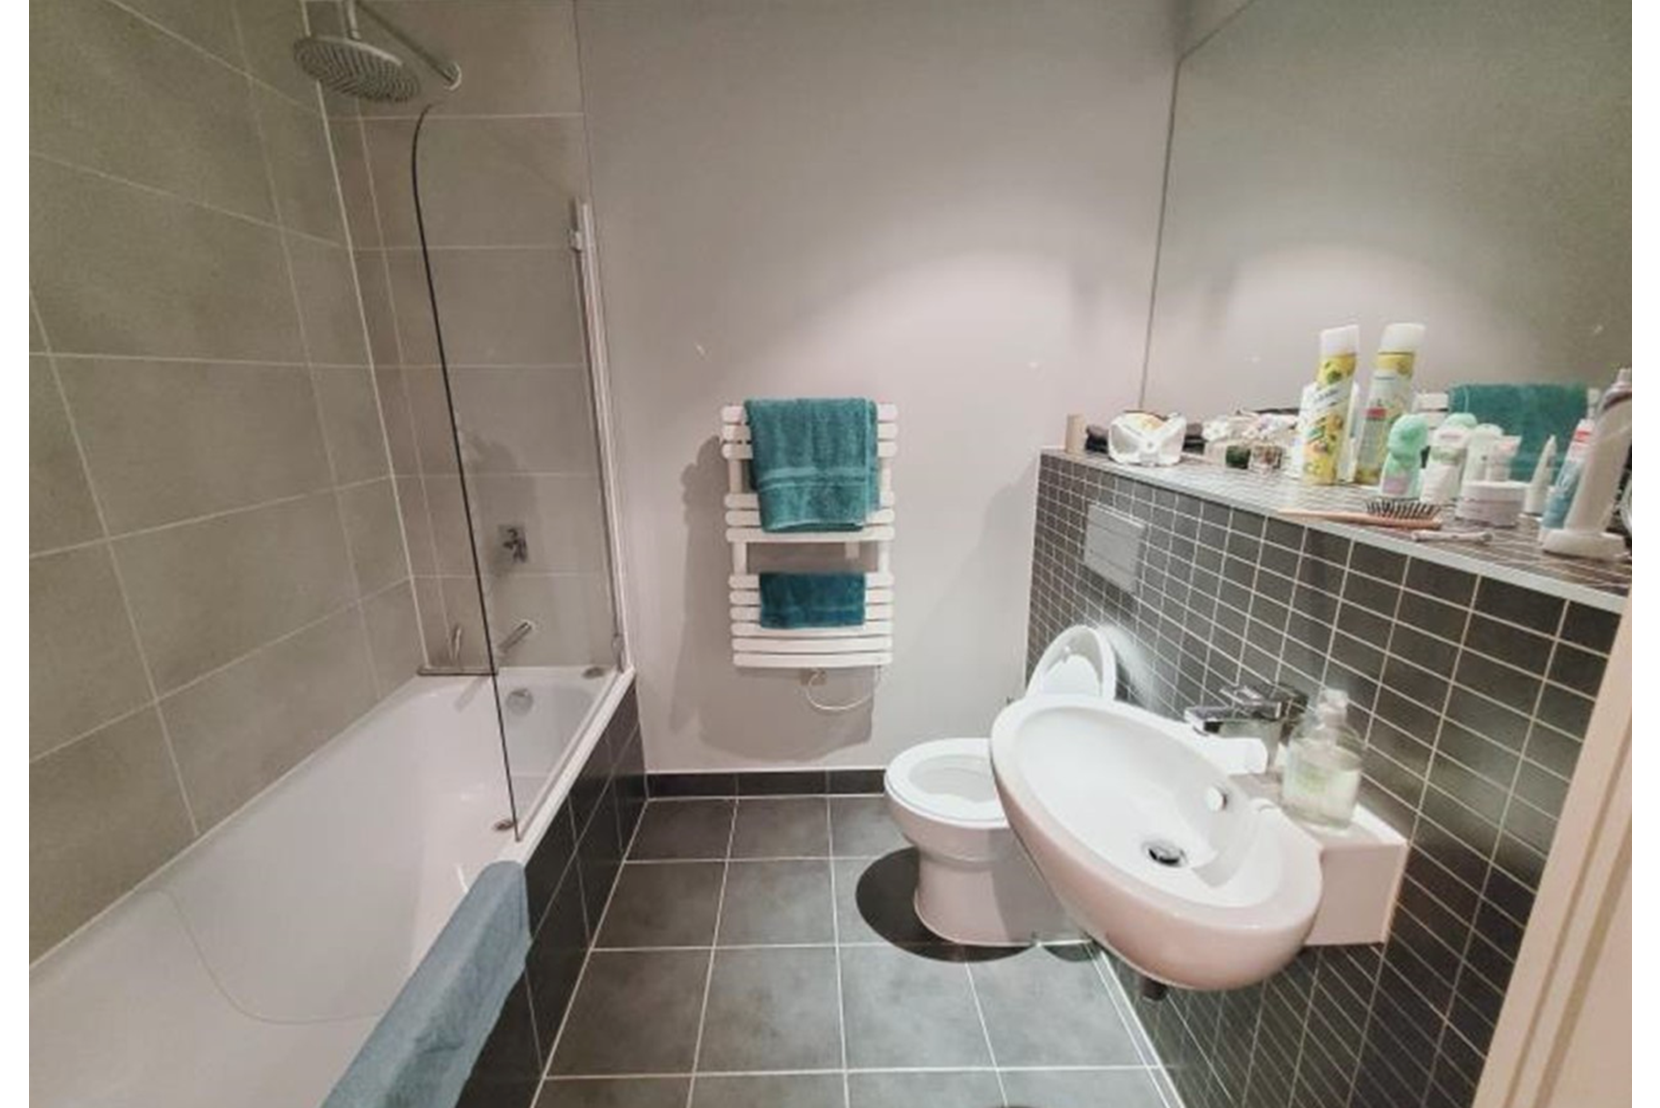 Apartments to Rent by Northern Group at Flint Glass Wharf, Manchester, M4, bathroom